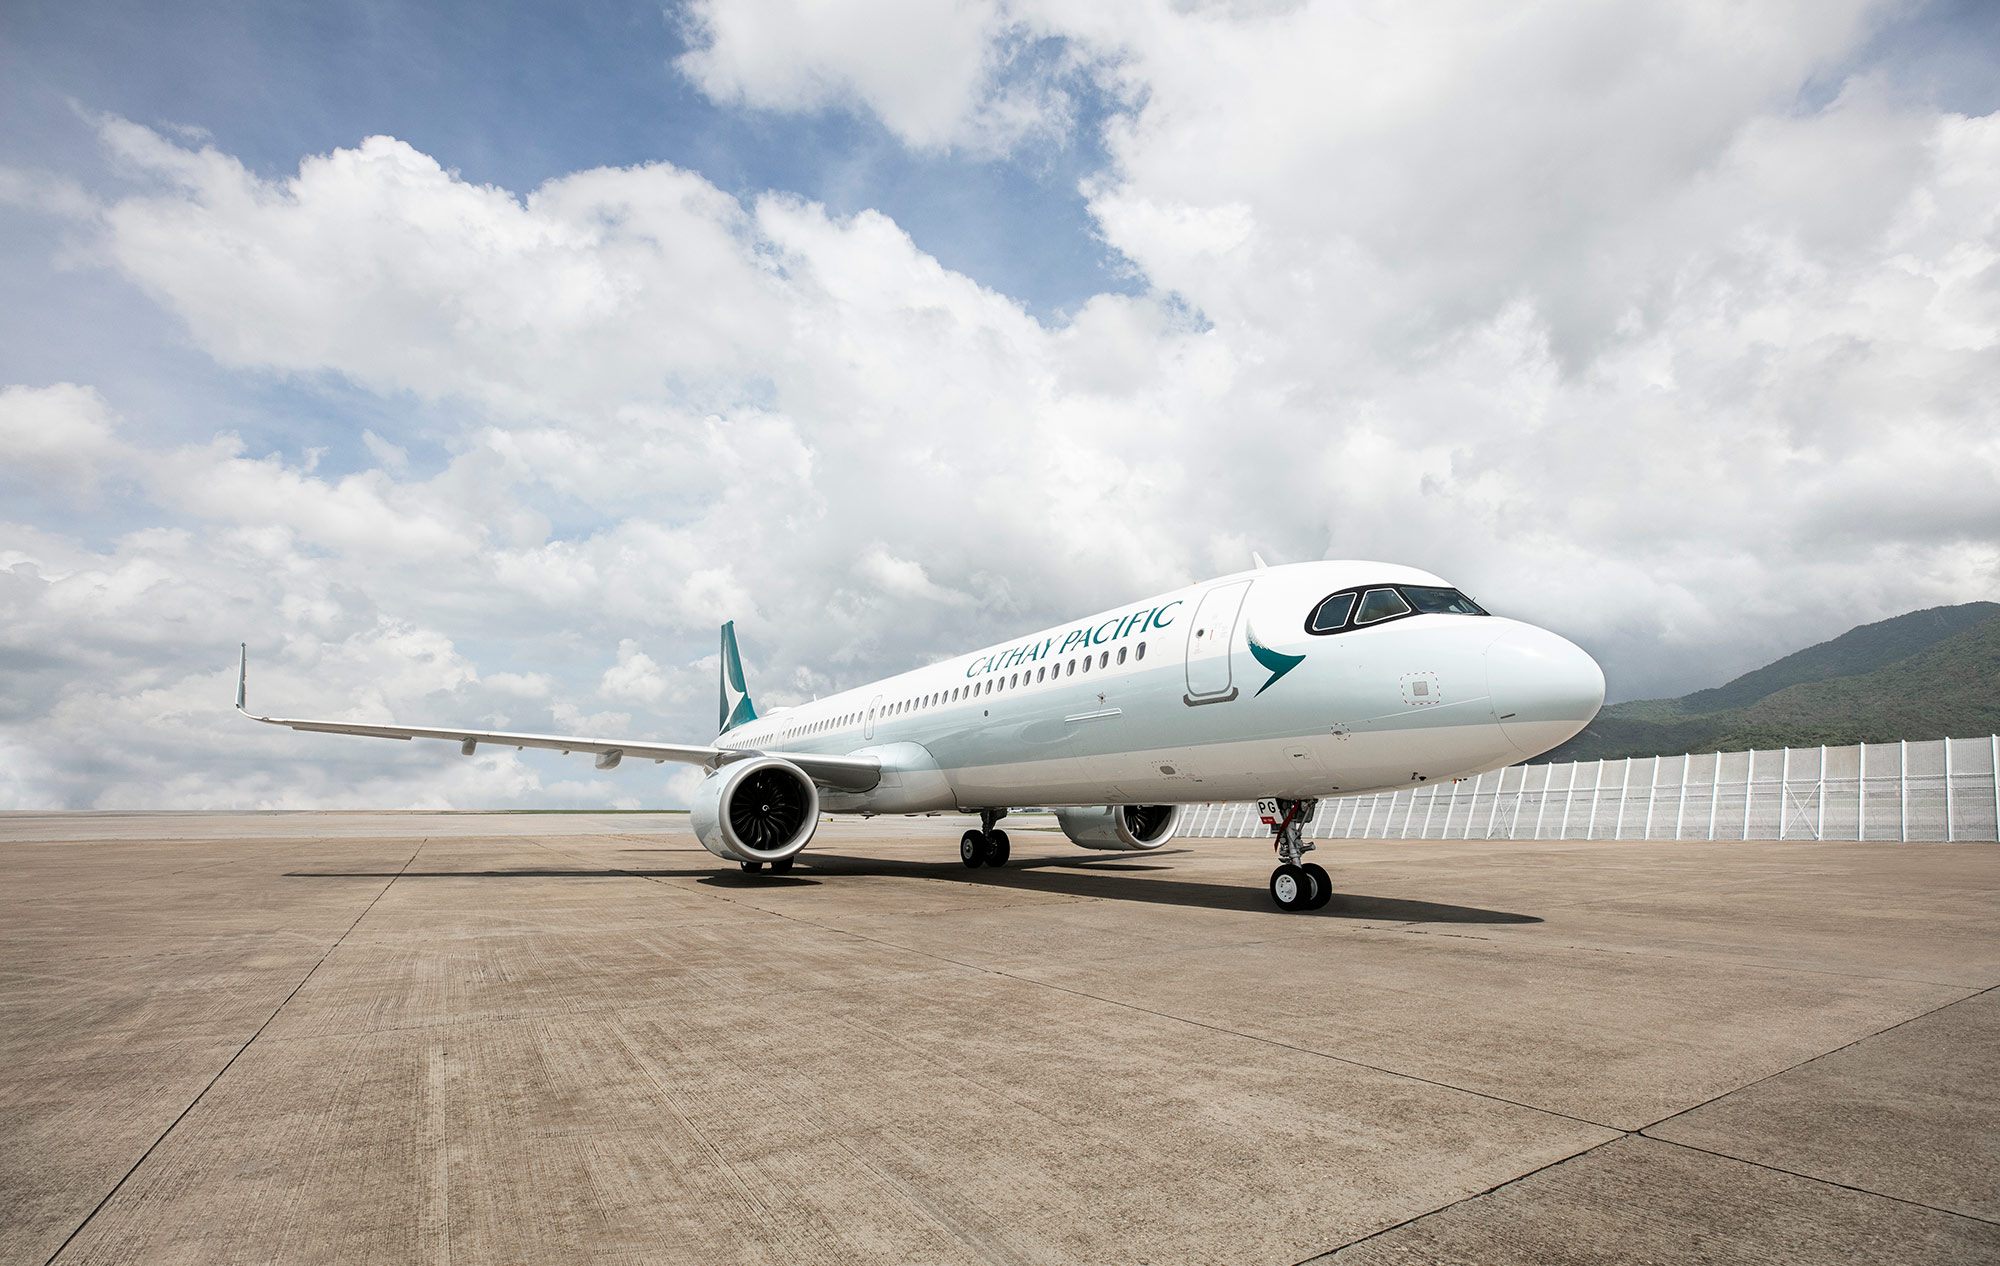 A side-front view of Cathay Pacific's new Airbus A321neo plane